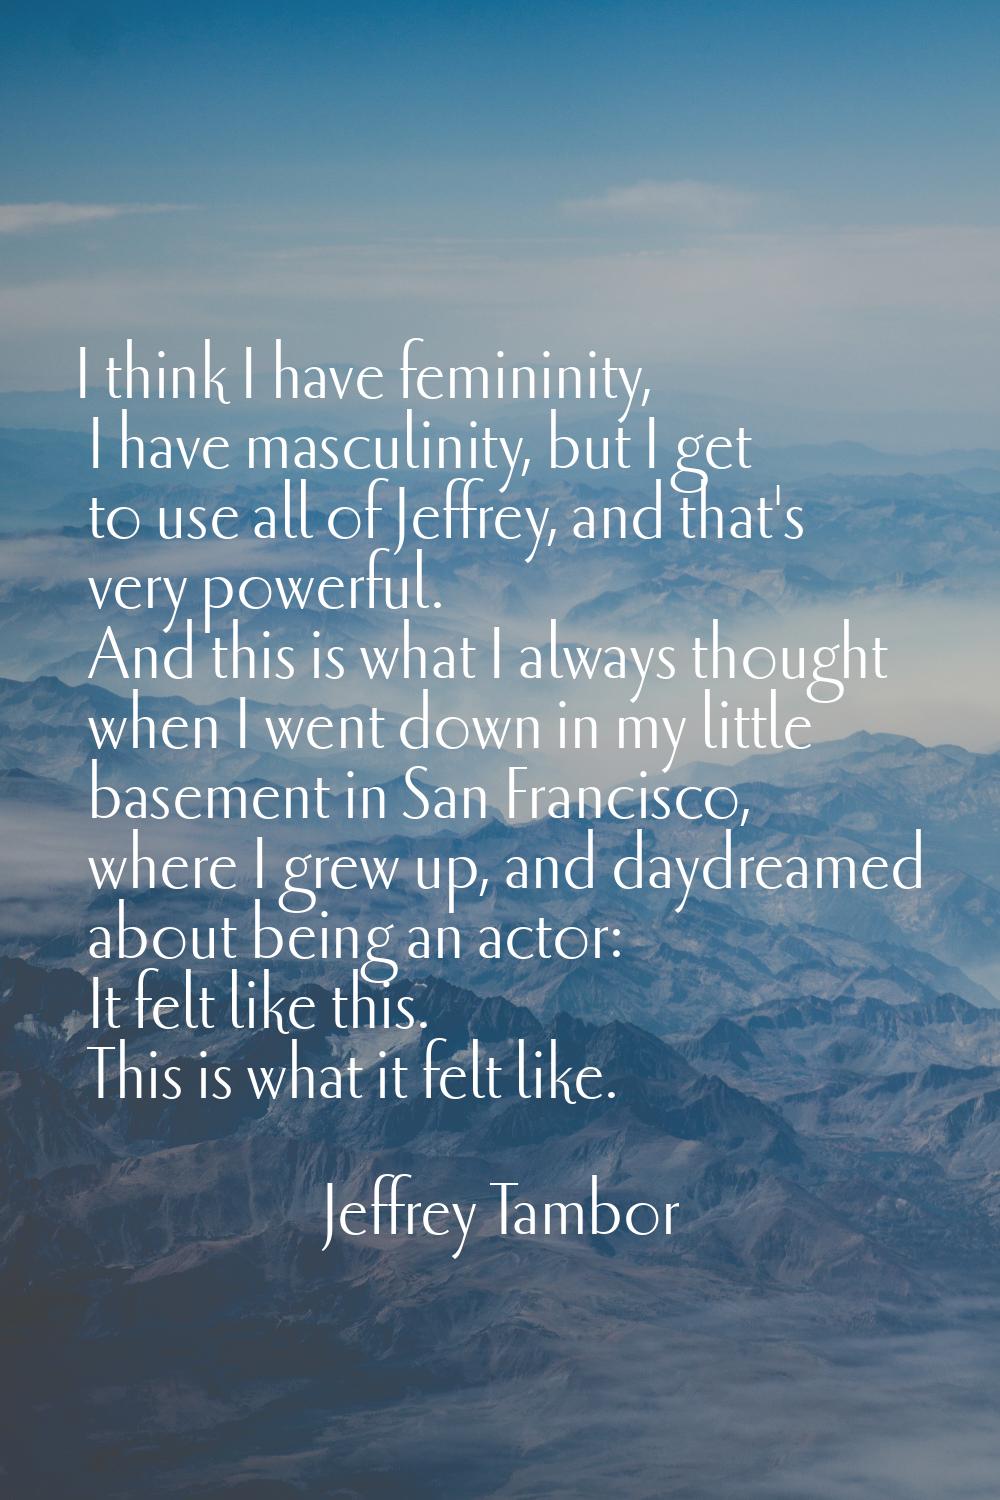 I think I have femininity, I have masculinity, but I get to use all of Jeffrey, and that's very pow